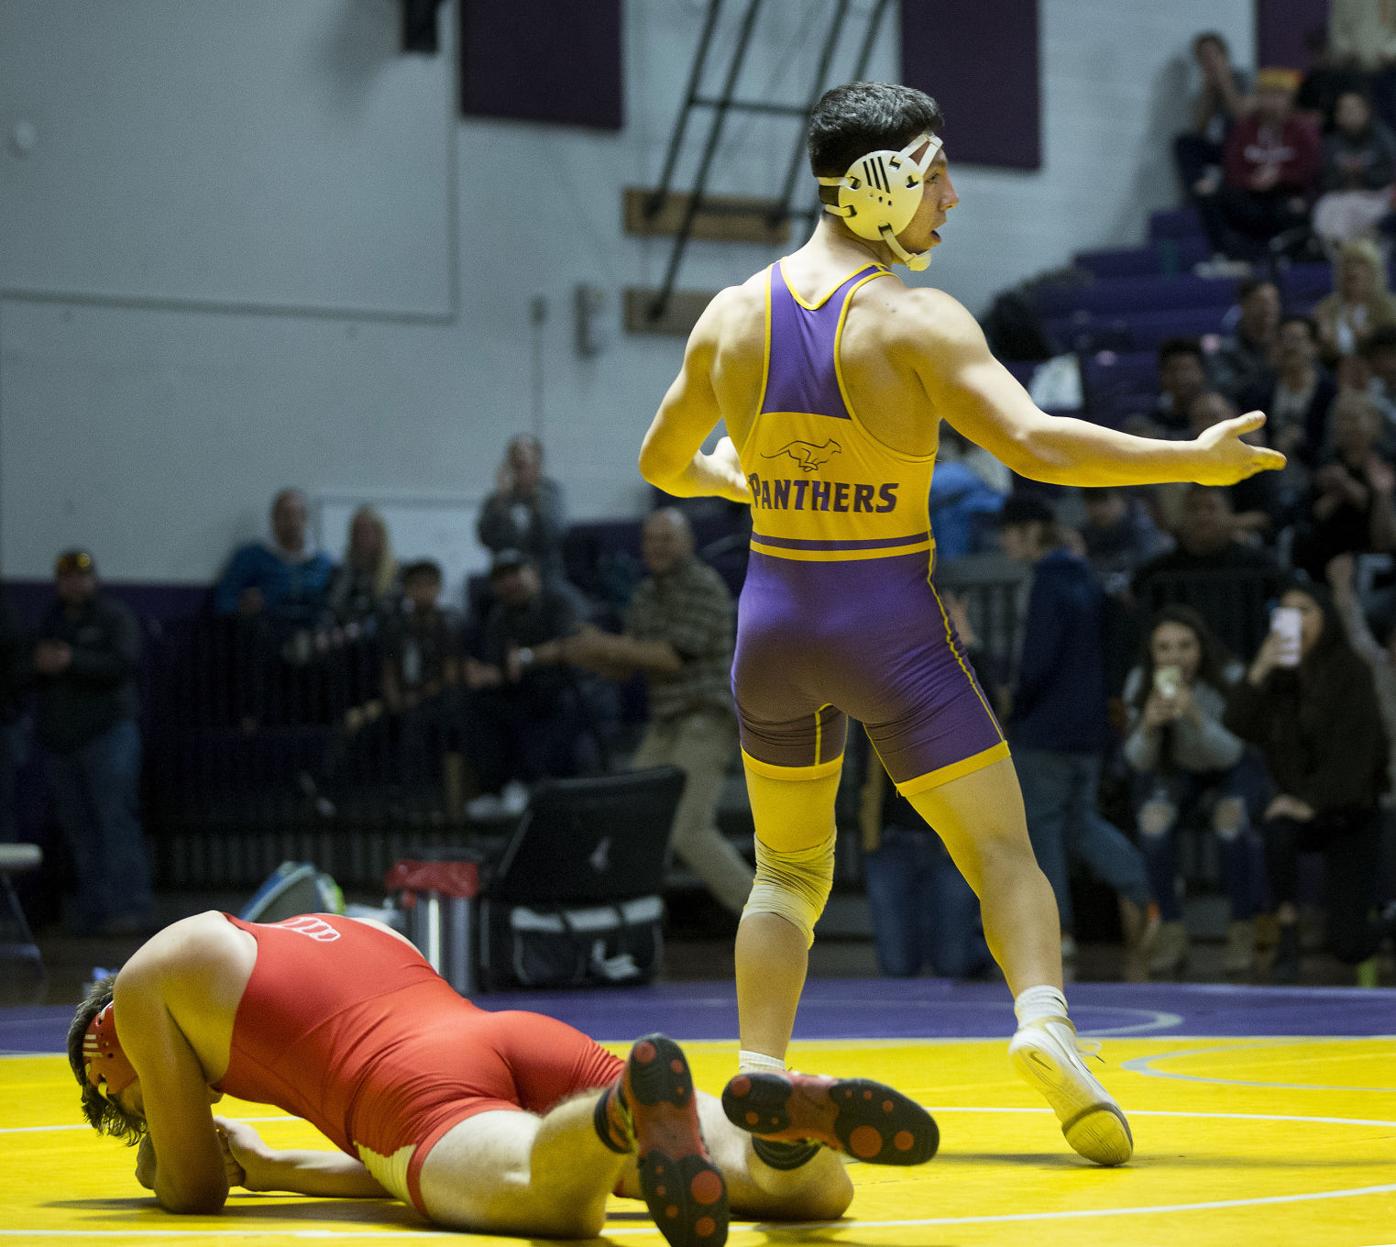 Men's Wrestling Pins a Second Place Finish at Adrian Invite to